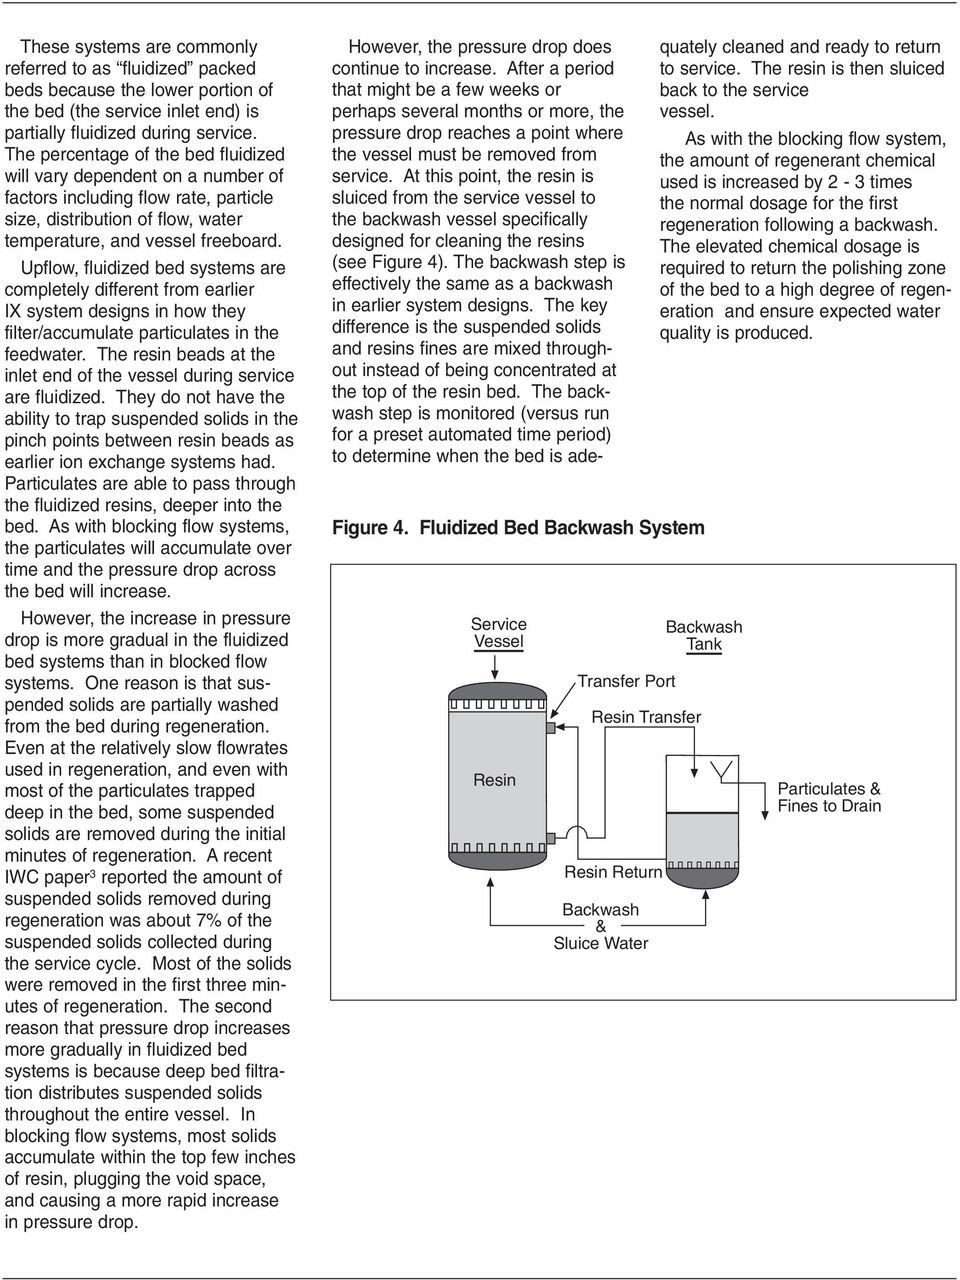 Upflow, fluidized bed systems are completely different from earlier IX system designs in how they filter/accumulate particulates in the feedwater.